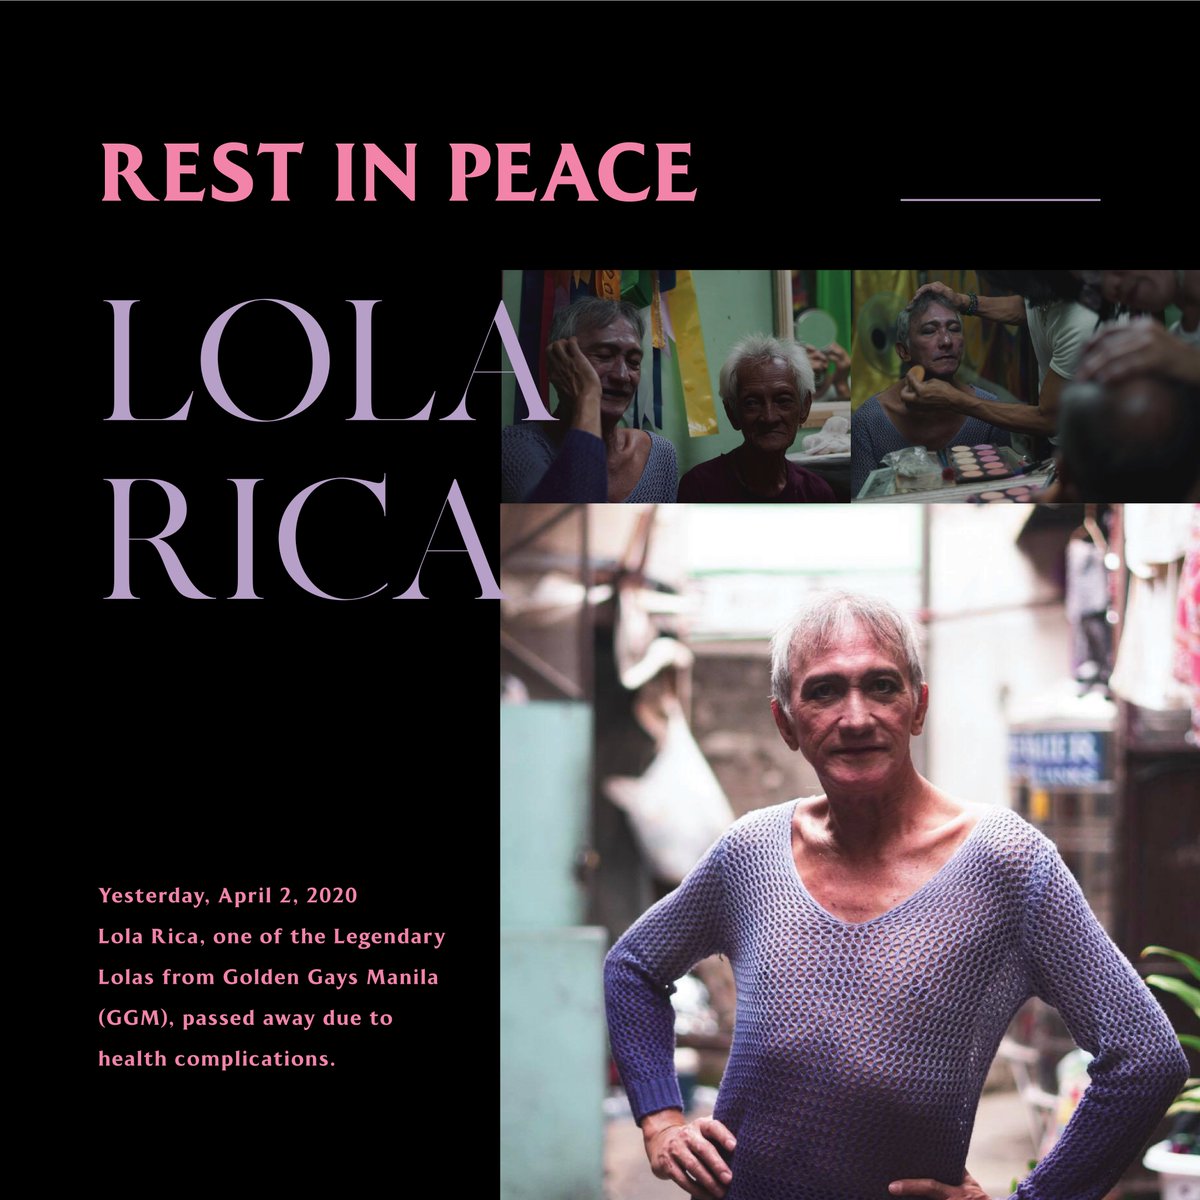 Rest in Peace to one of the Legendary Lolas in Golden Gays Manila, Lola Rica. She passed away last April 2, 2020, due to health complications. According to Lola Mon, they already received a total of Php 121,700. Thank you.  https://www.facebook.com/tanginangyaan/posts/659005354885171